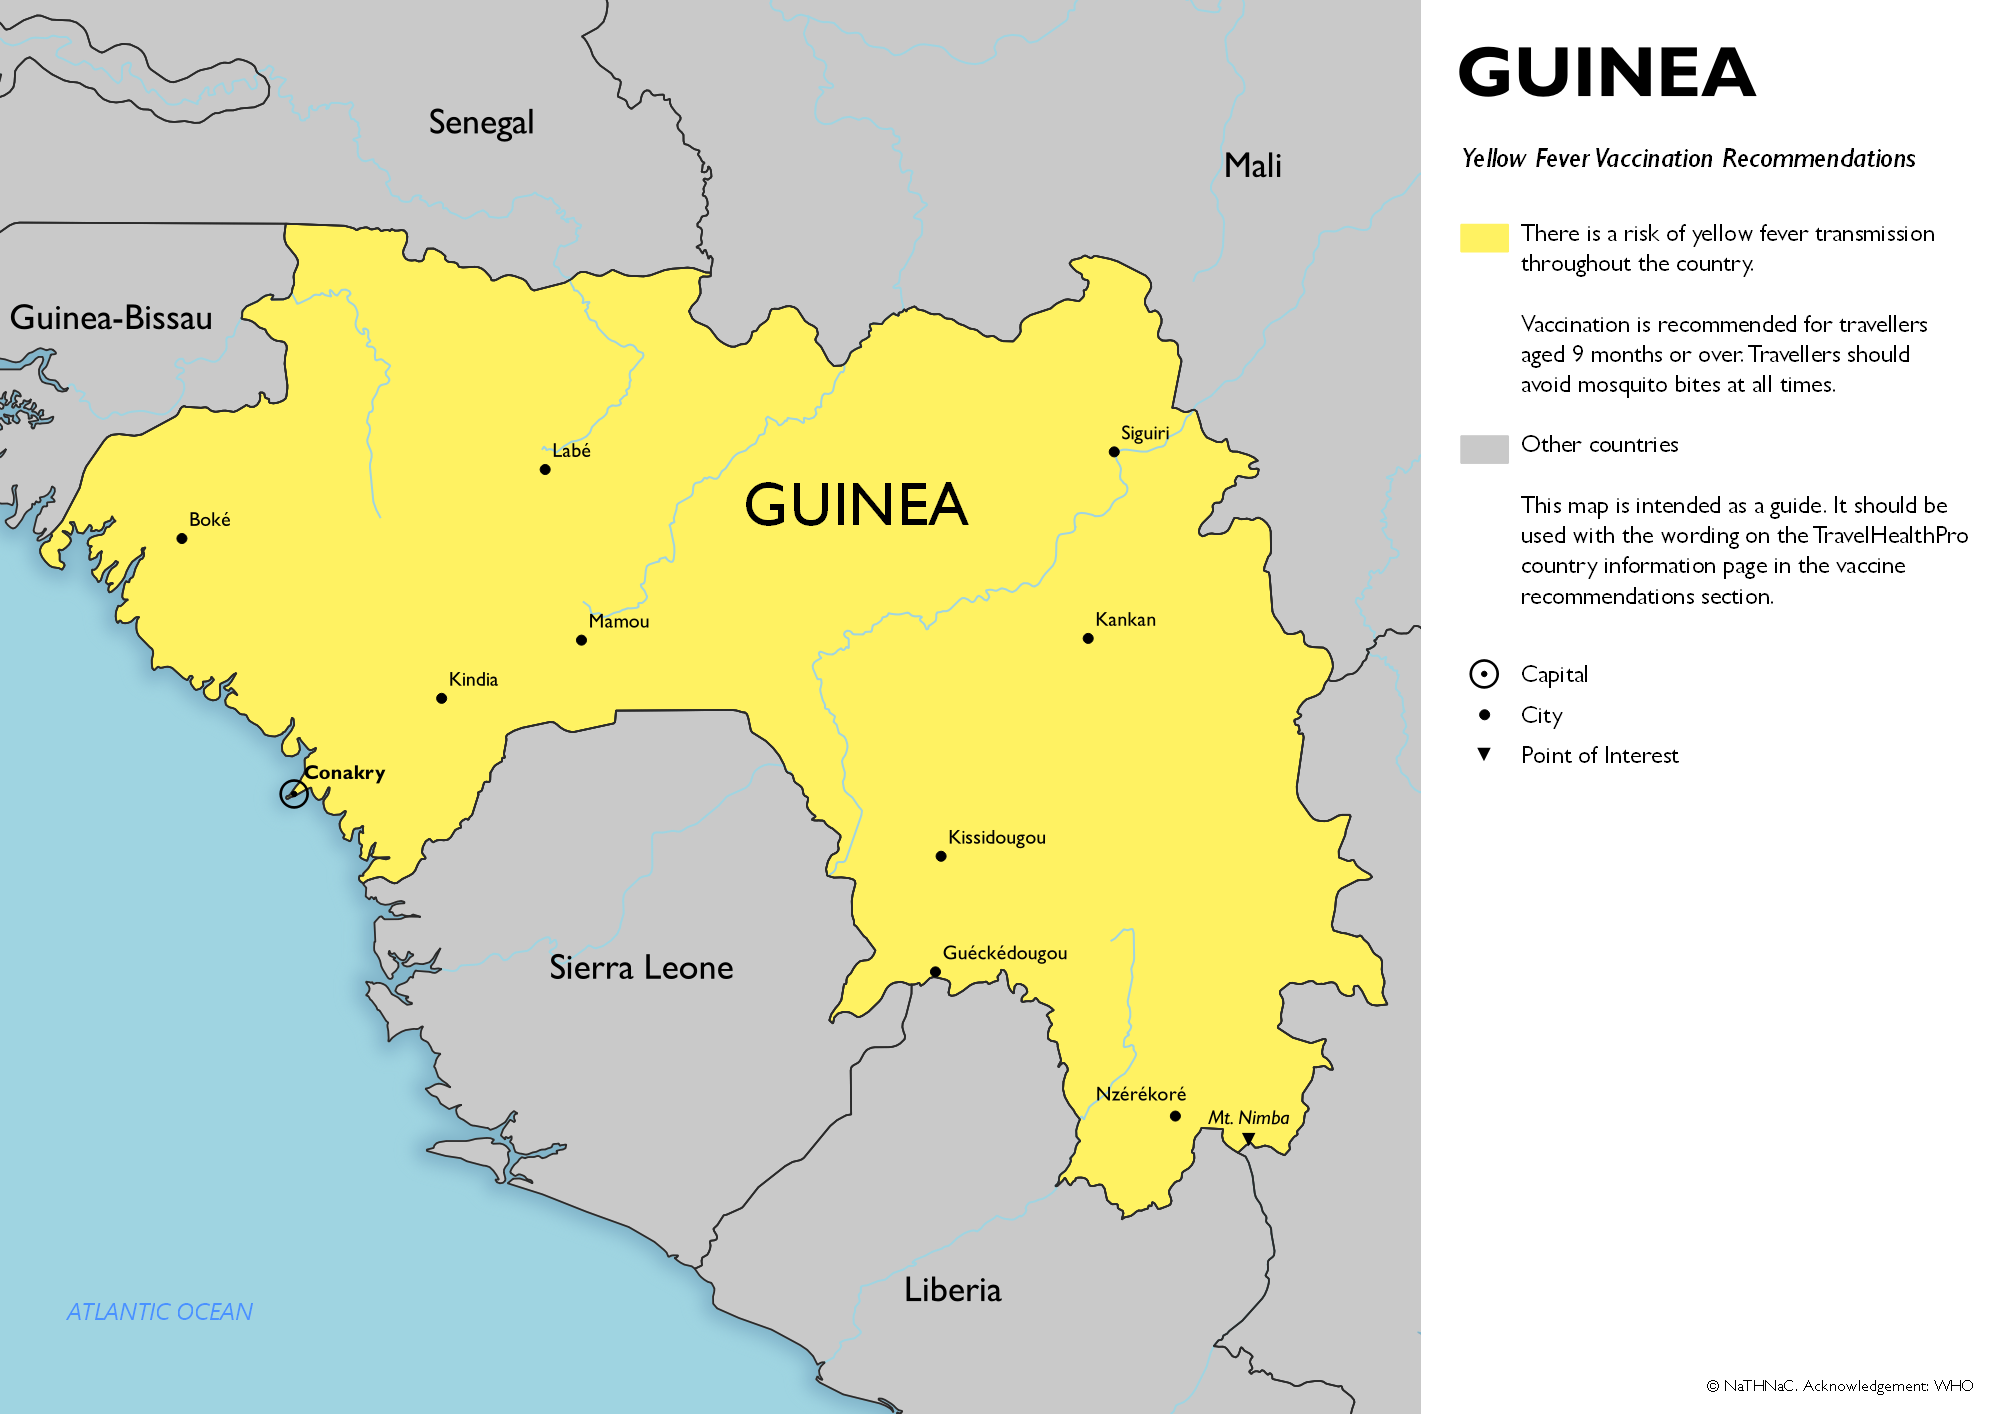 Yellow fever vaccine recommendation map for Guinea